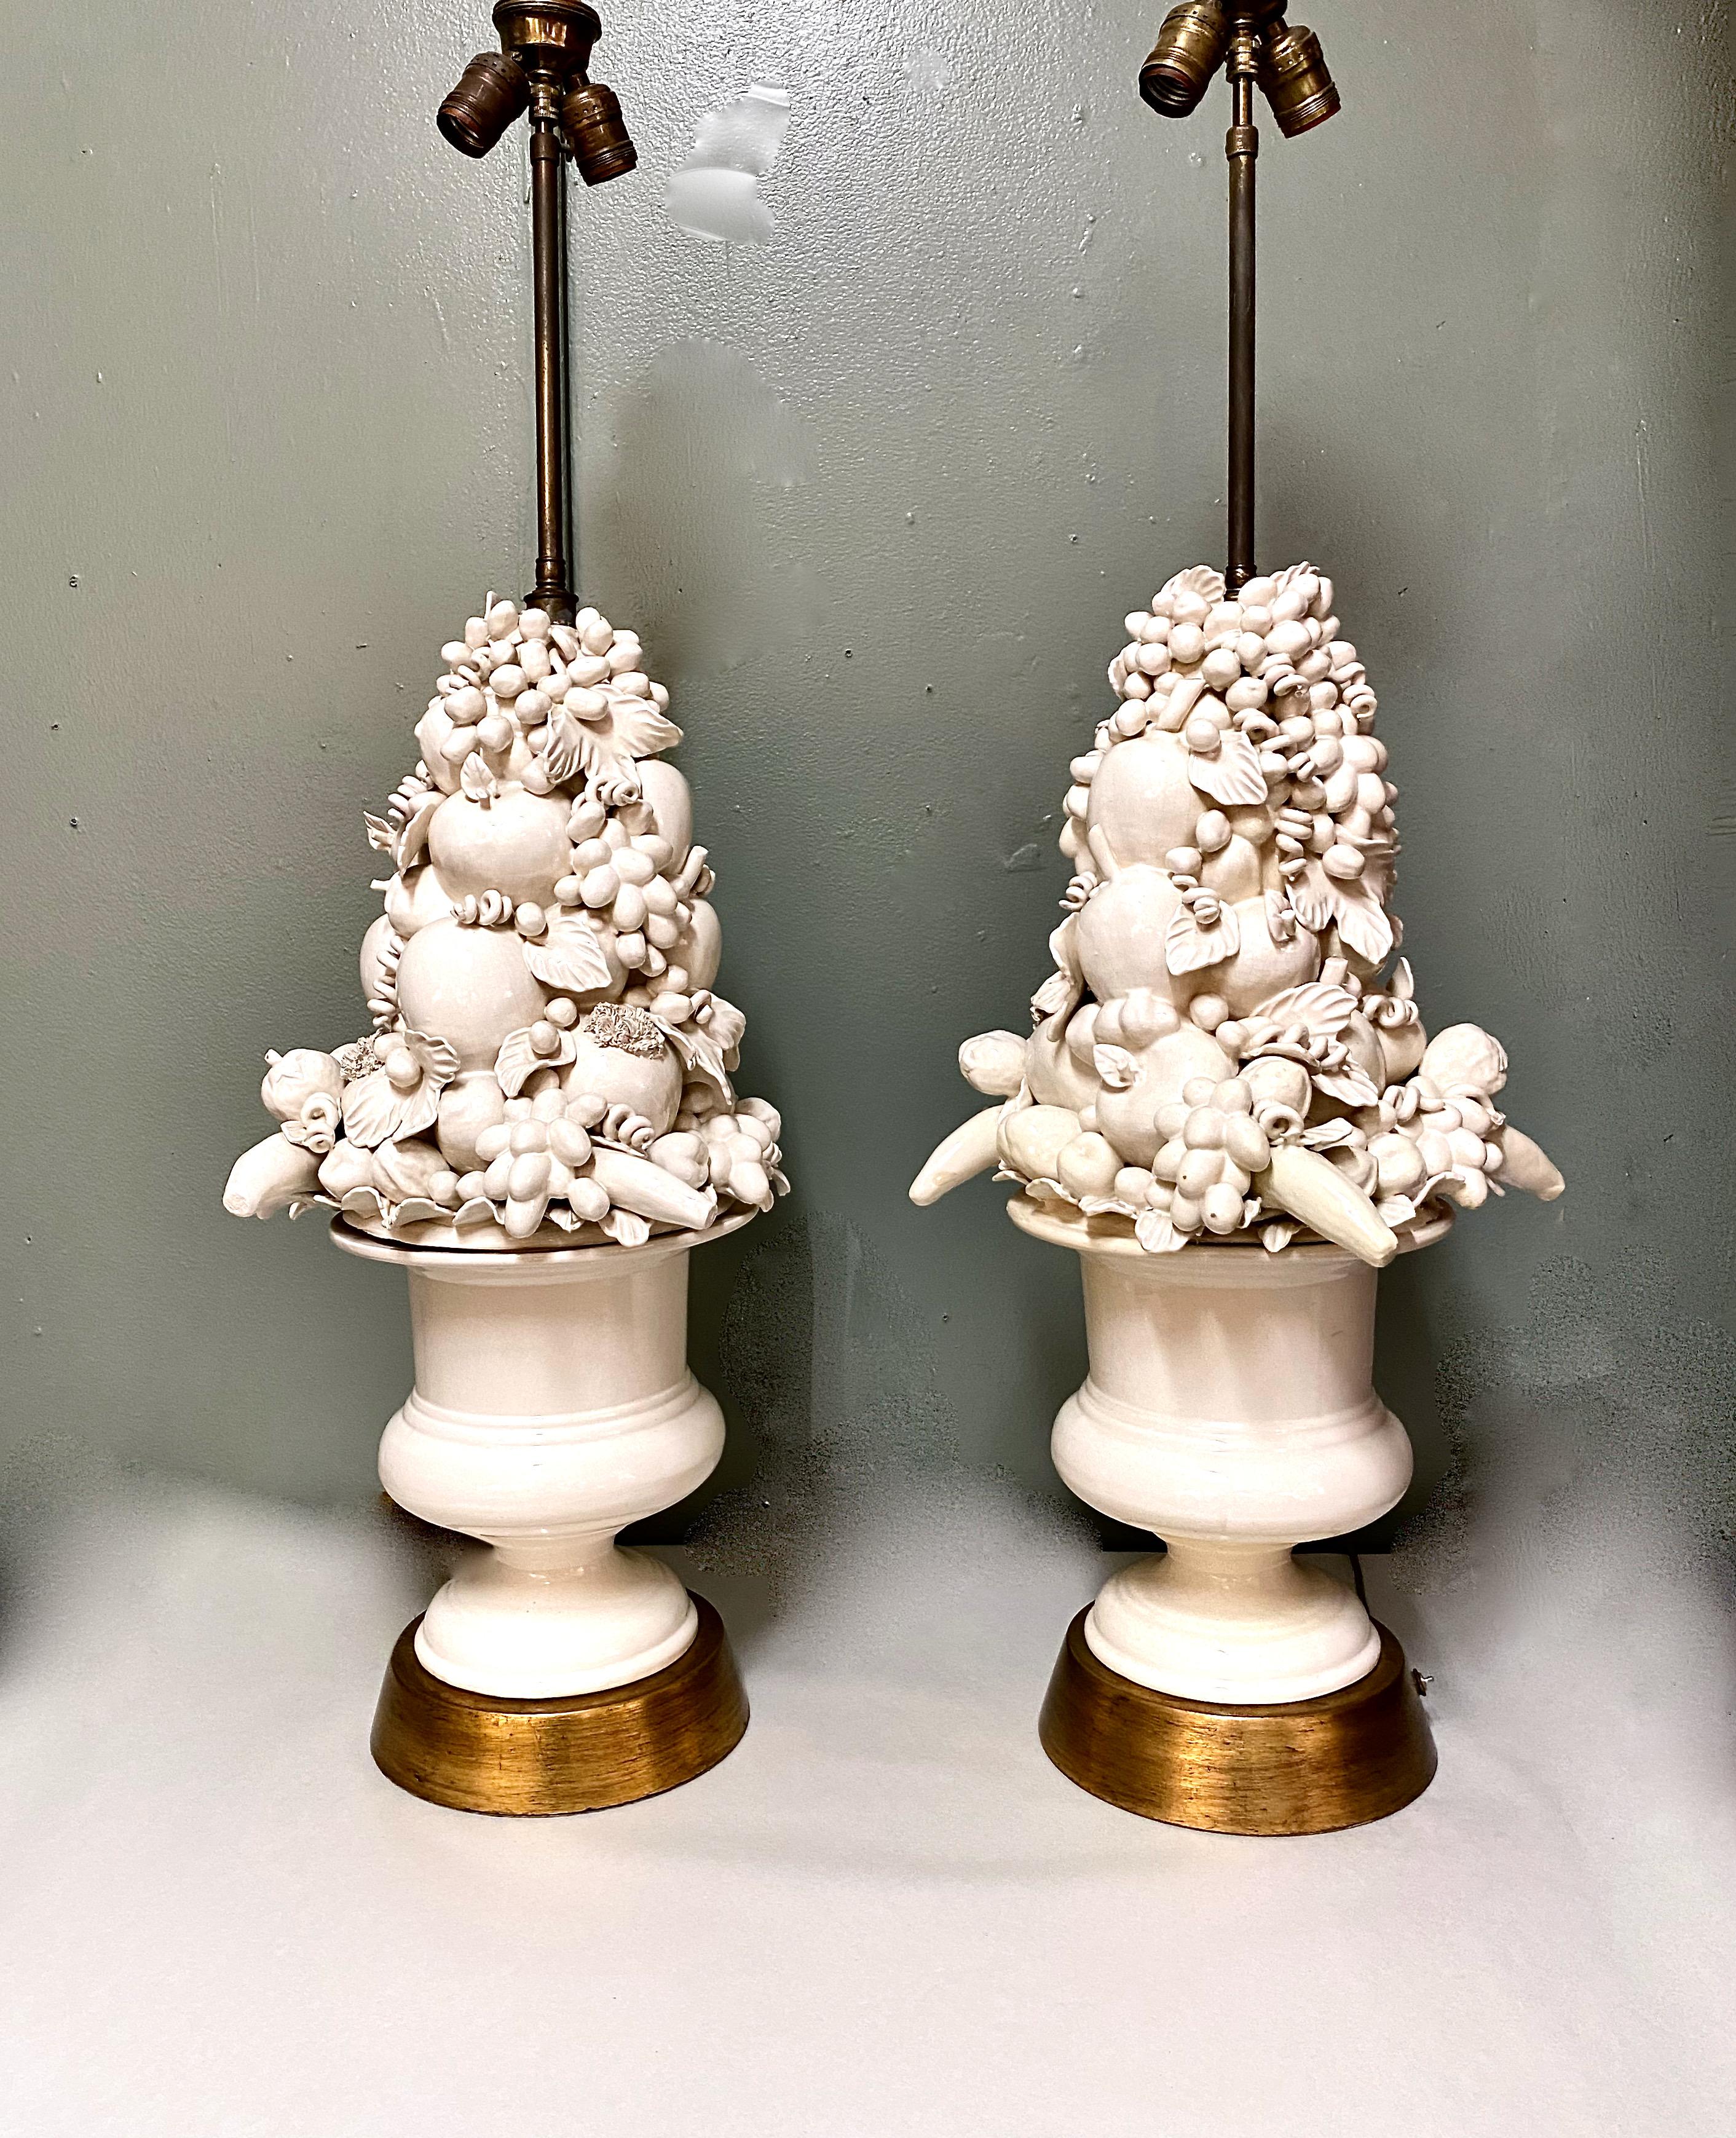 This is a stunning pair of unusual mid-20th century Italian pottery lamps composed of a neoclassical style urn heaped with various fruits. The white body of the lamps is highlighted by a substantial gold leafed plinth. The double cluster electrical